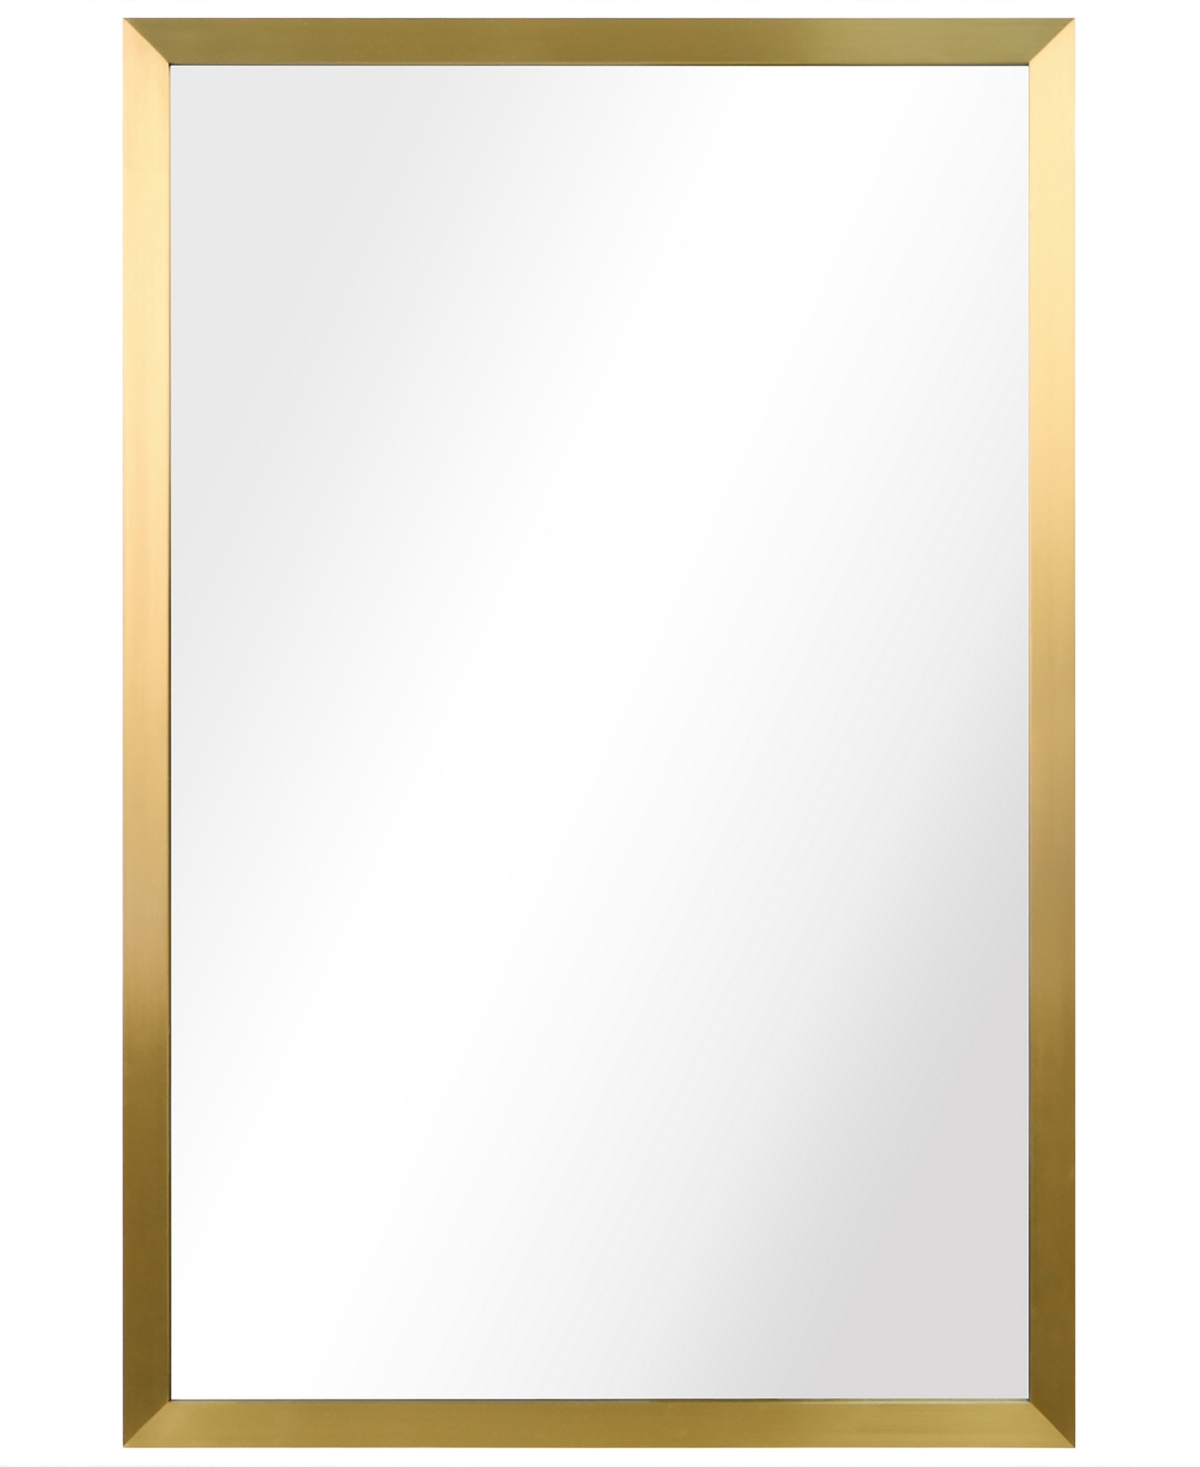 Contempo Brushed Stainless Steel Rectangular Wall Mirror, 20" x 30" - Gold-Tone